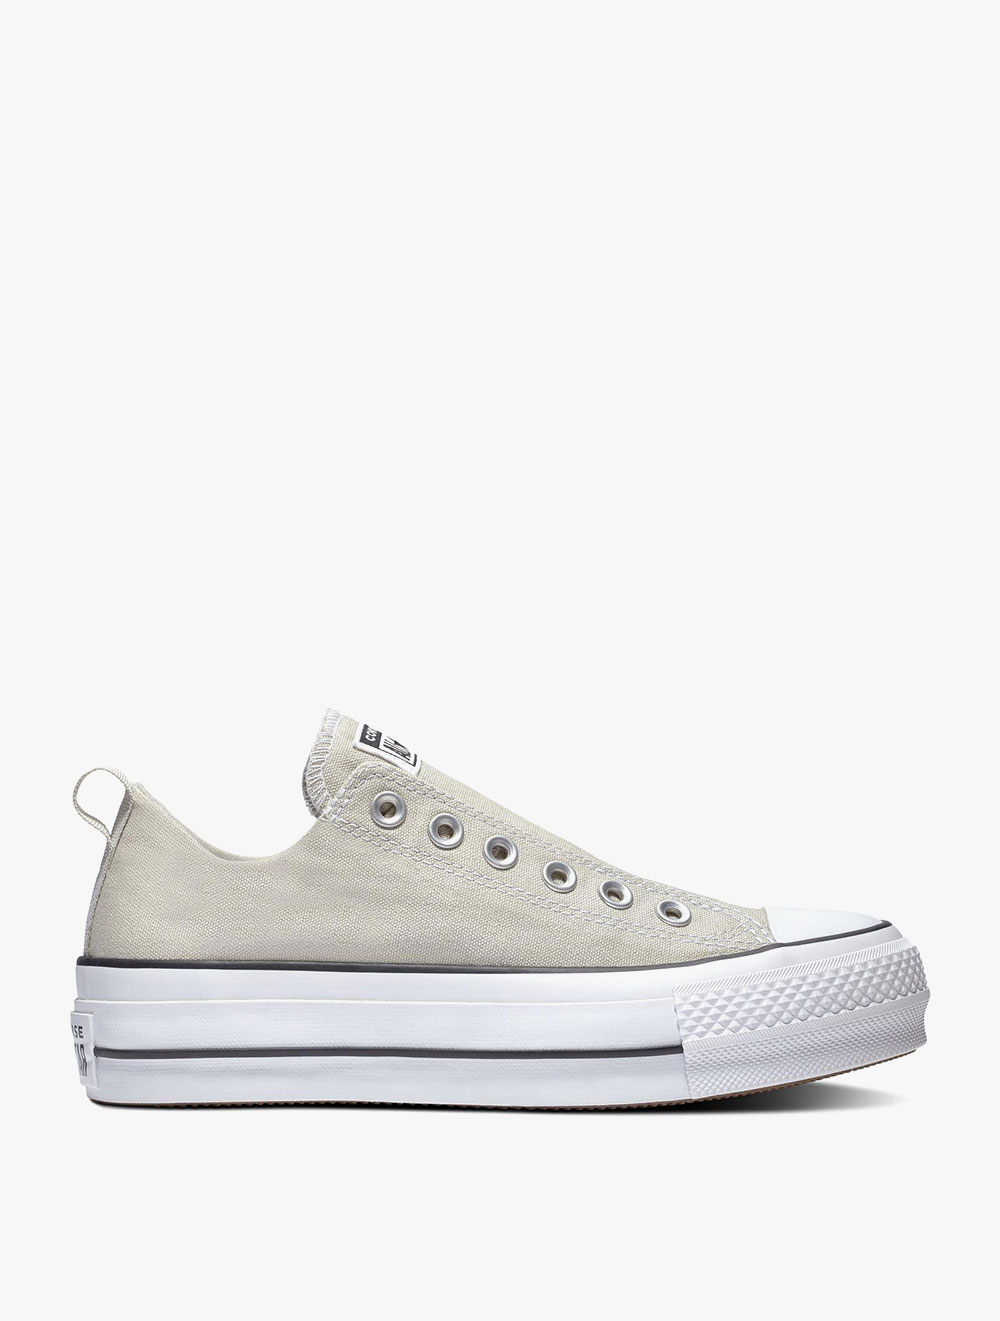 converse chuck taylor slip on shoes